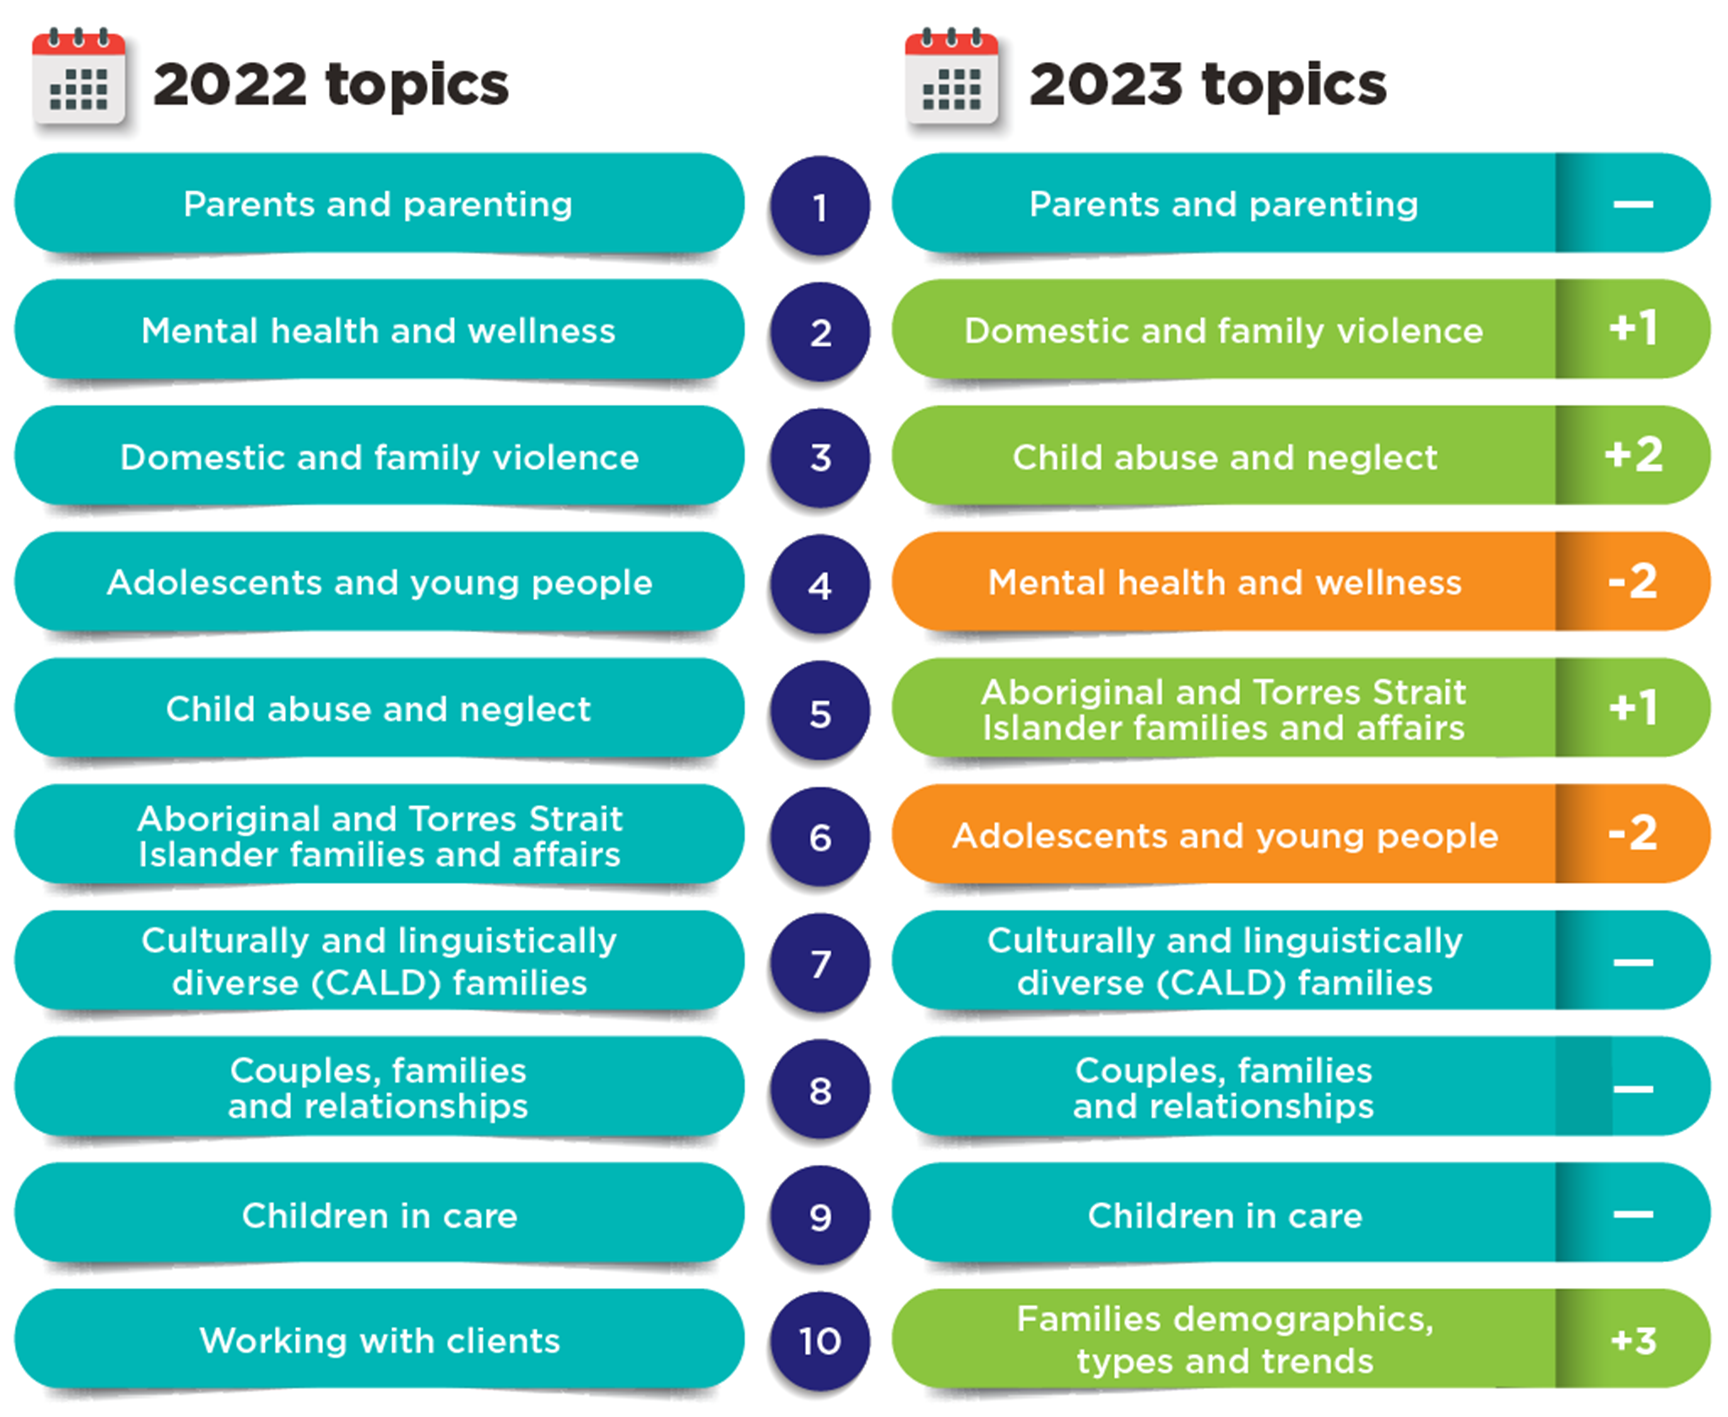 Topic priorities: 2022 ¬– 1. Parents and parenting; 2. Mental health and wellness; 3. Domestic and family violence; 4. Adolescents and young people; 5. Child abuse and neglect; 6. Aboriginal and Torres Strait Islander families and affairs; 7. Culturally and linguistically diverse (CALD) families; 8. Couples, family and relationships; 9. Children in care; 10. Working with clients; 2023: 1. Parents and parenting; 2. Domestic and family violence; 3. Child abuse and neglect; 4. Mental health and wellness; 5. Ab